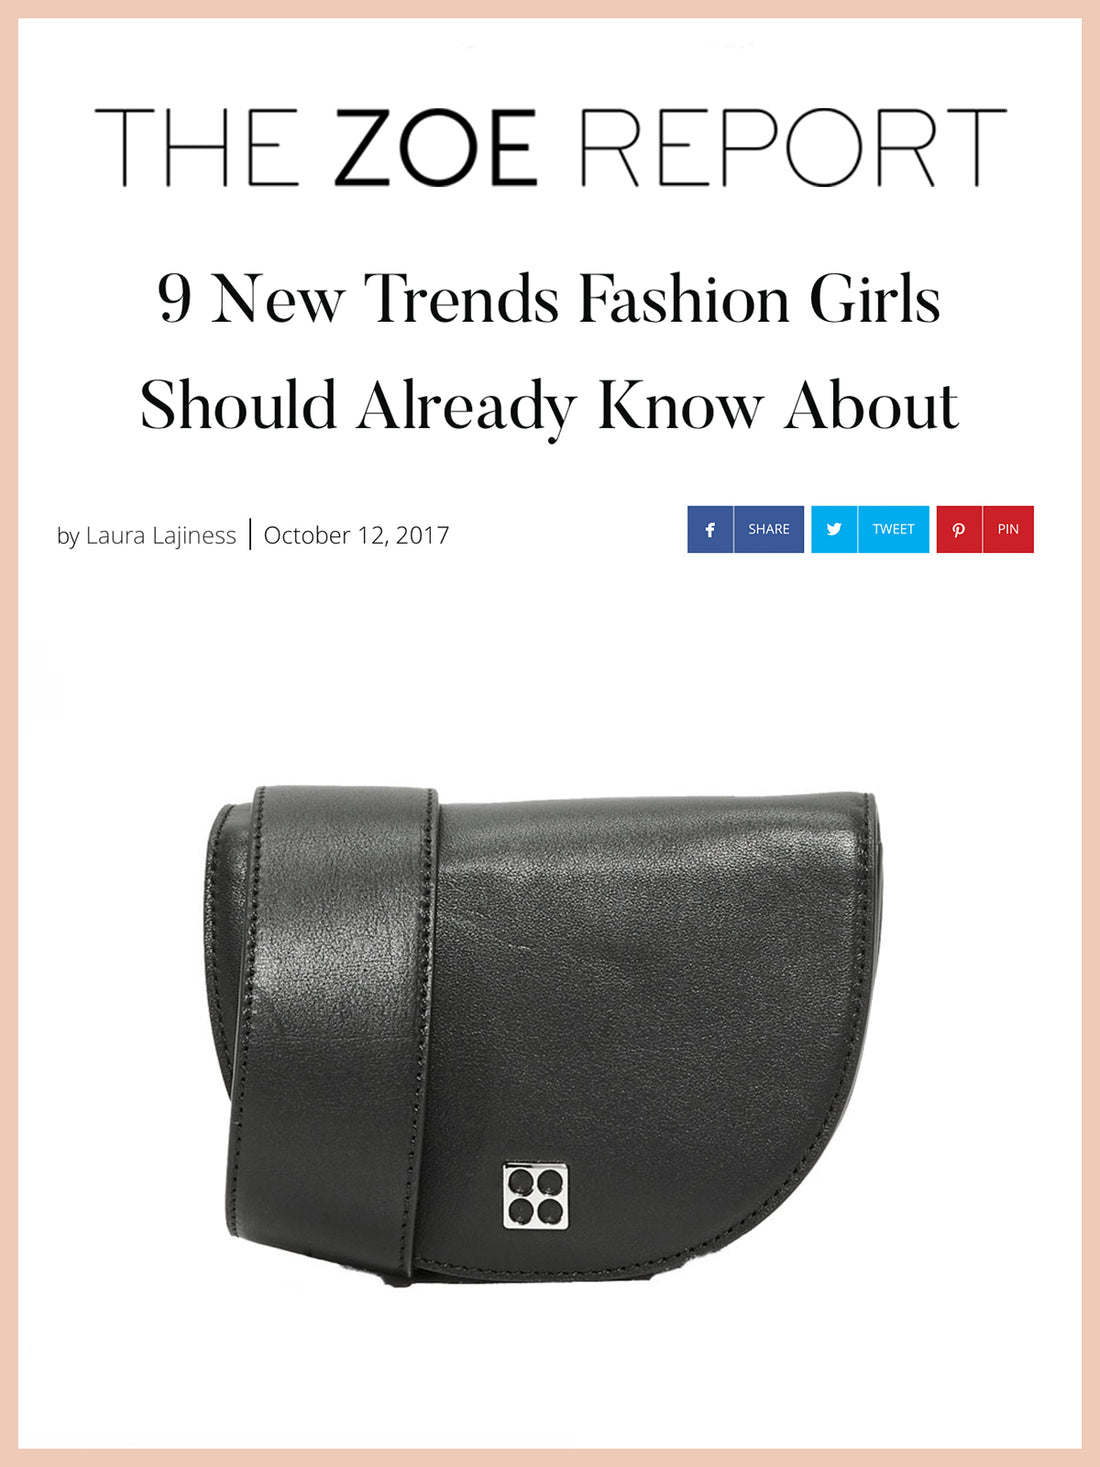 THE ZOE REPORT, 9 New Trends Fashion Girls Should Already Know About